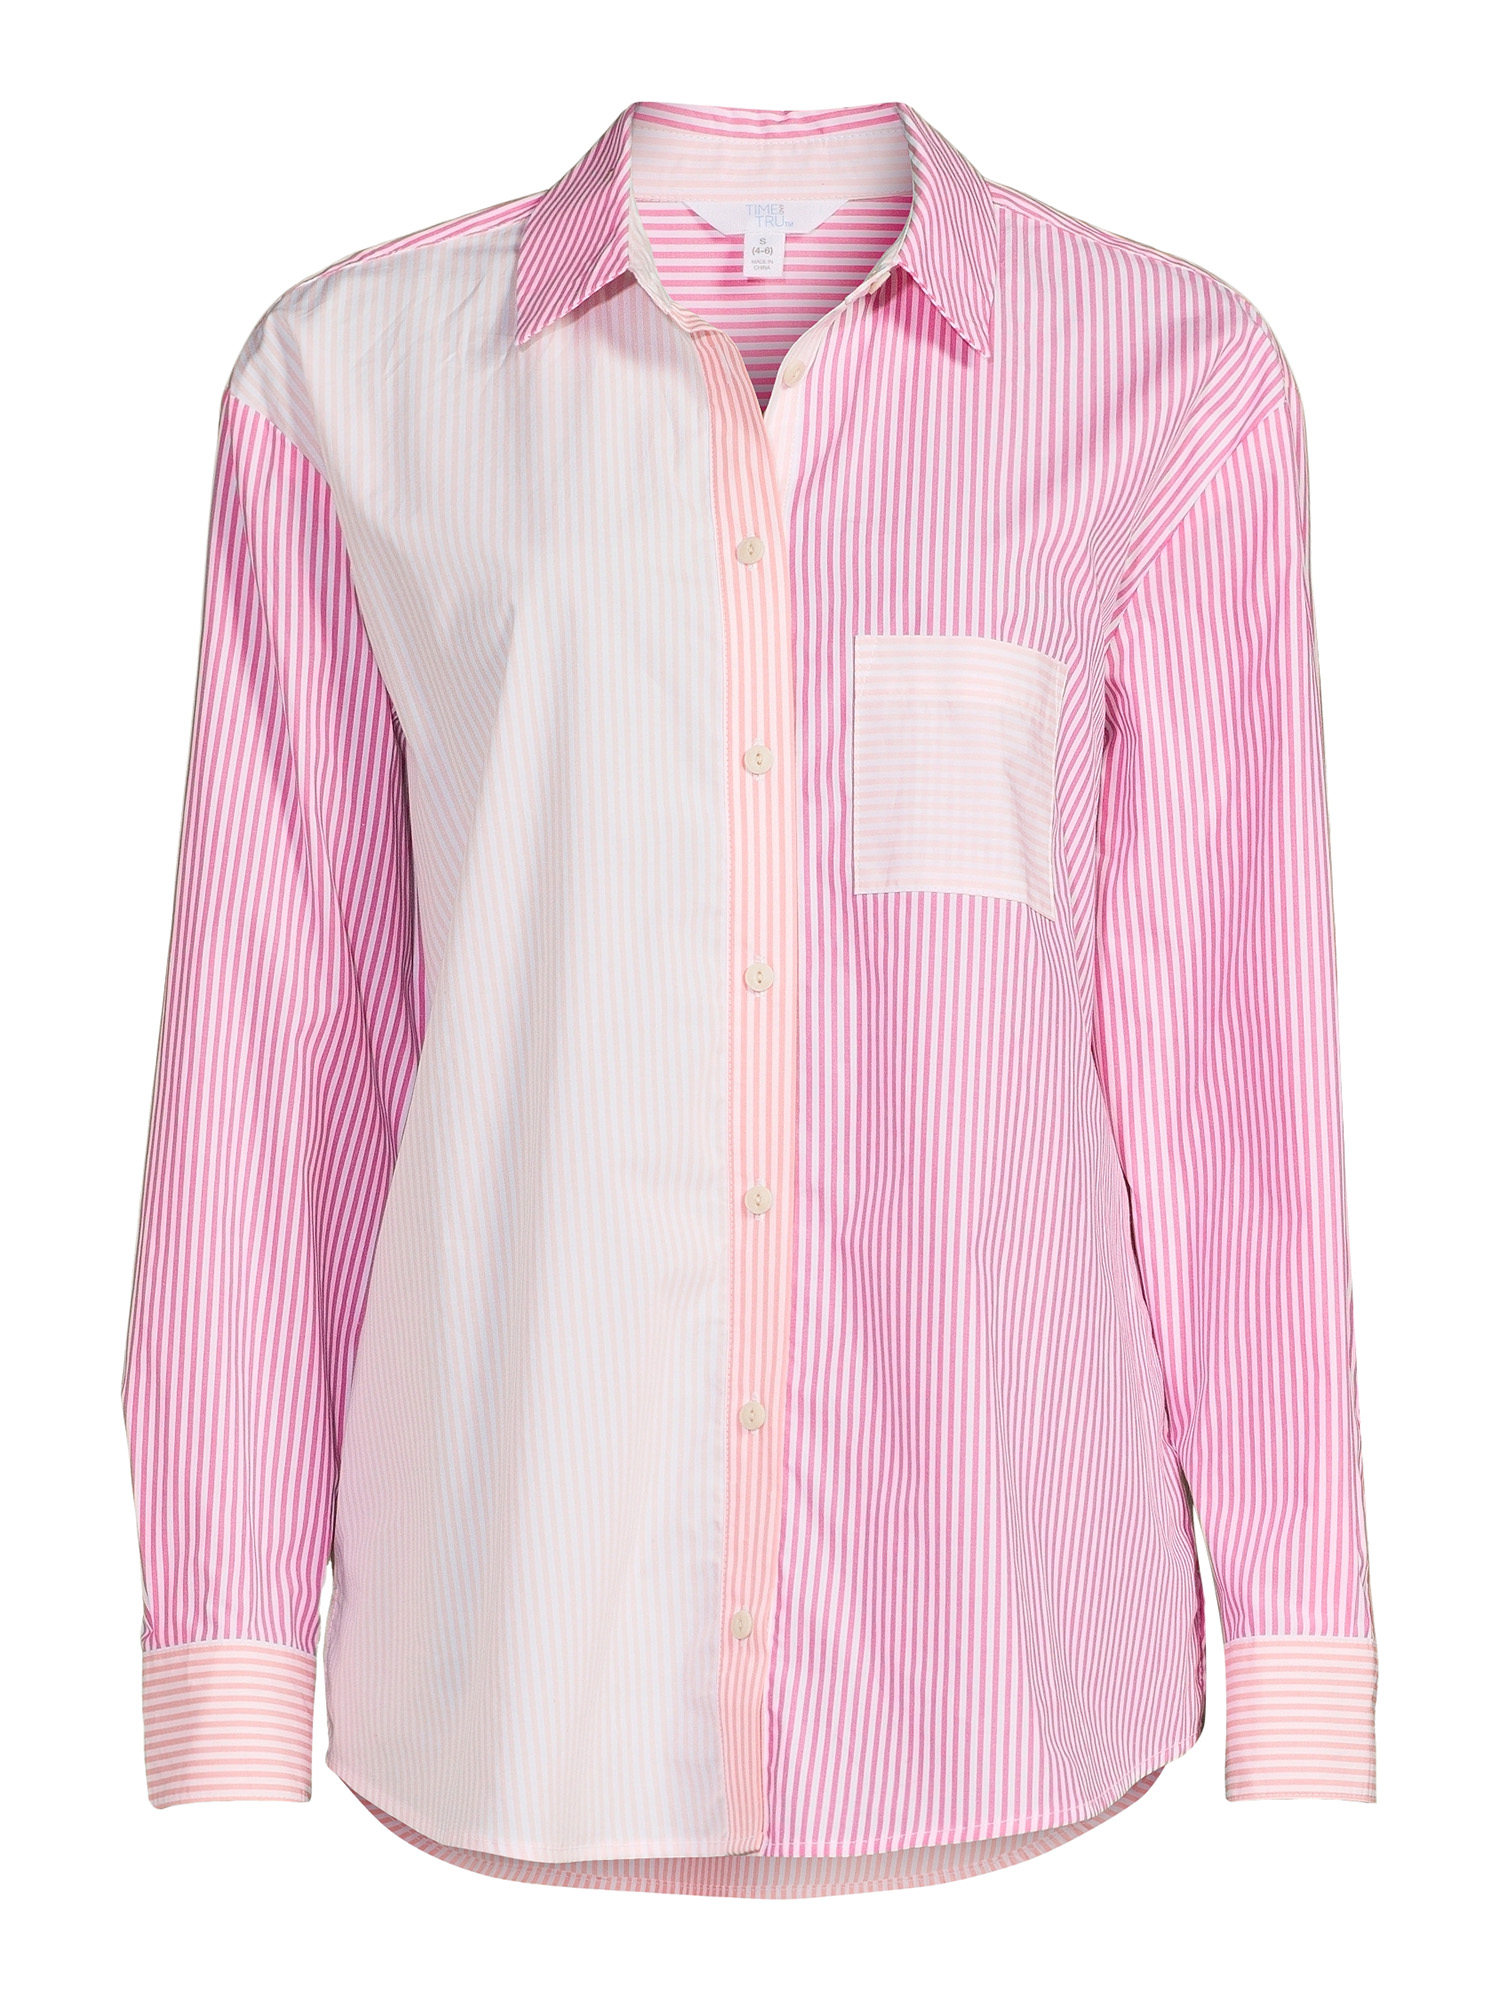 Time and Tru Women's Oversized Button-Down Shirt - image 5 of 5